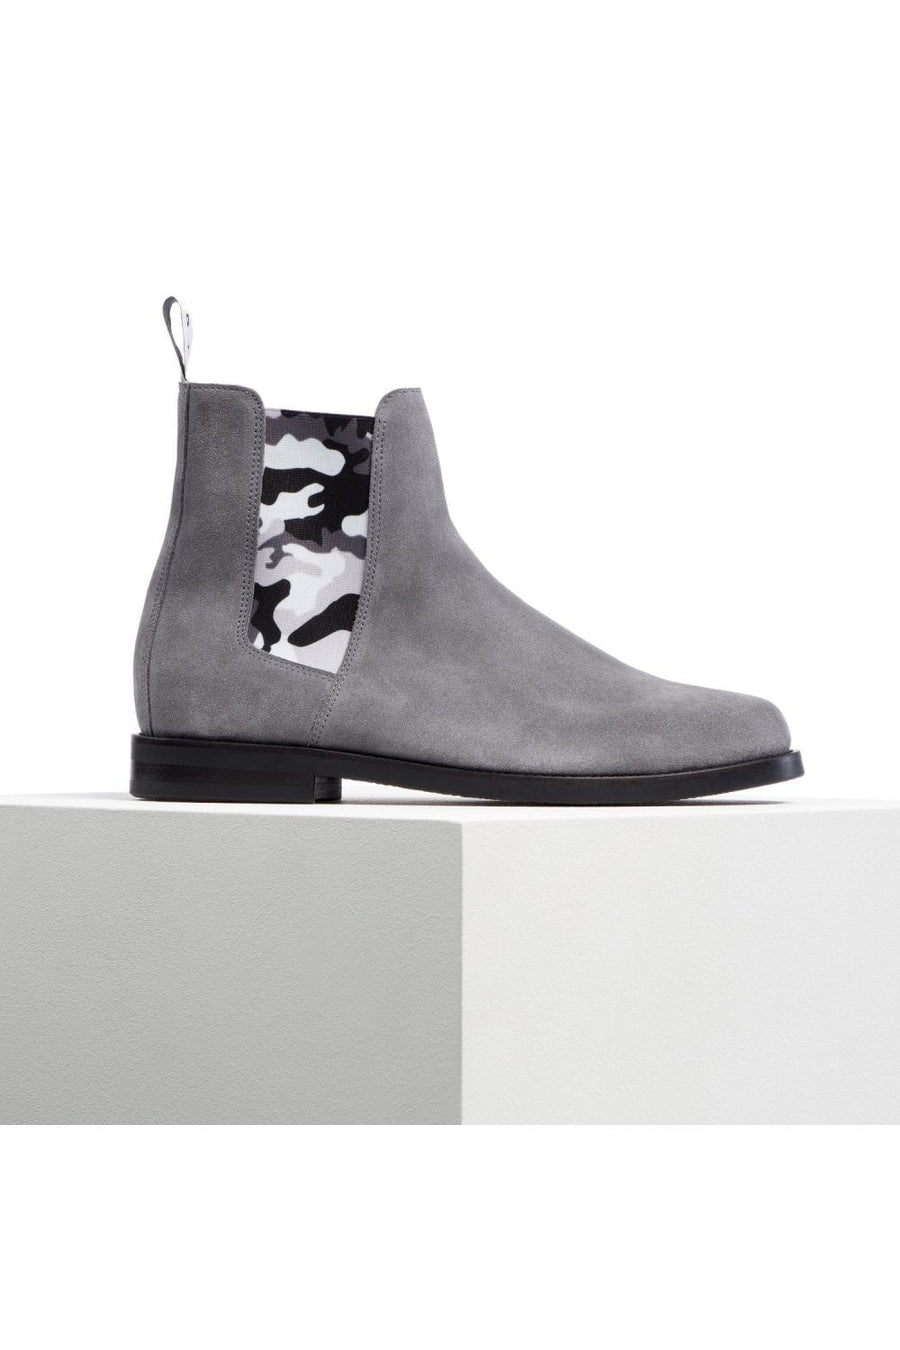 Buy the Duke + Dexter Storm Chelsea Boot Grey at Intro. Spend £50 for free UK delivery. Official stockists. We ship worldwide.